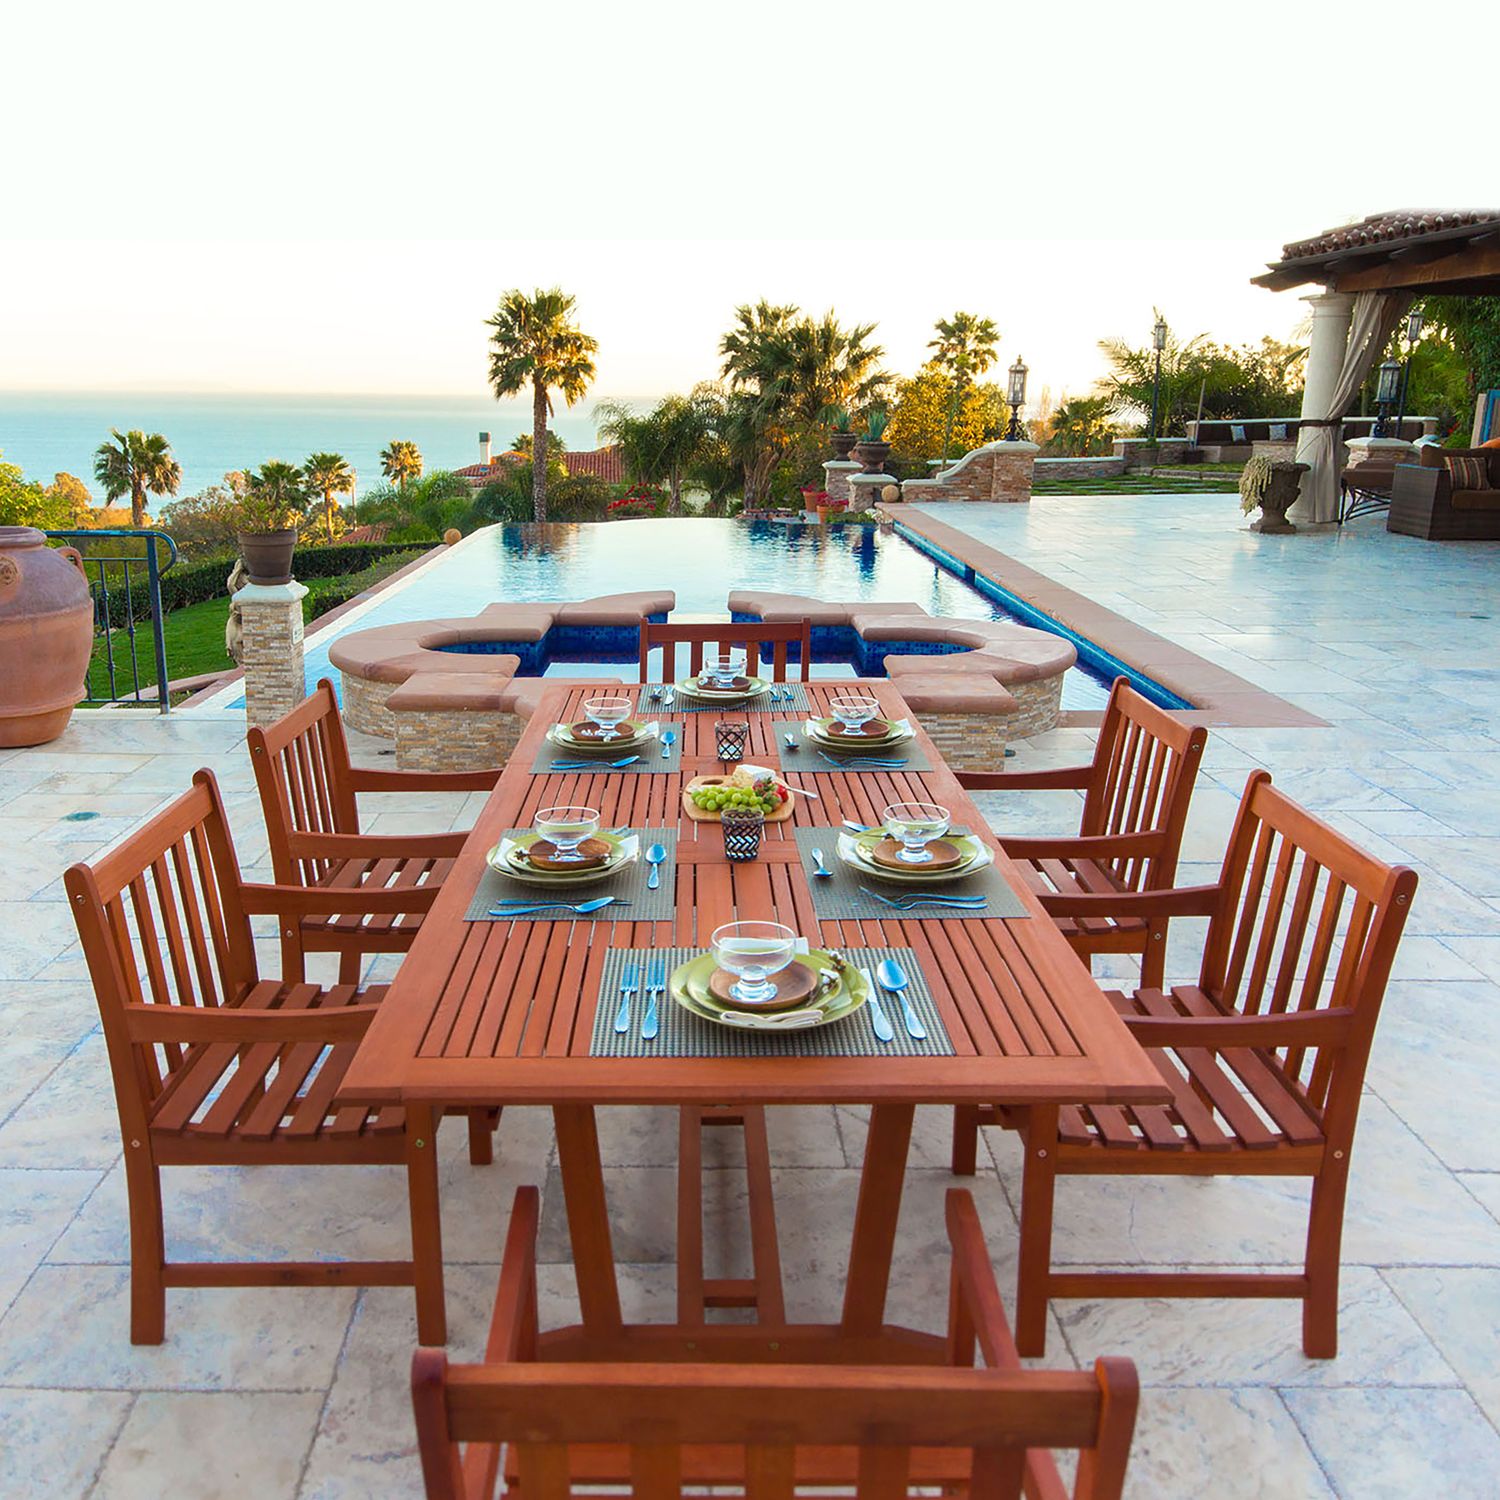 Malibu Outdoor 7-piece Wood Patio Dining Set with Extension Table